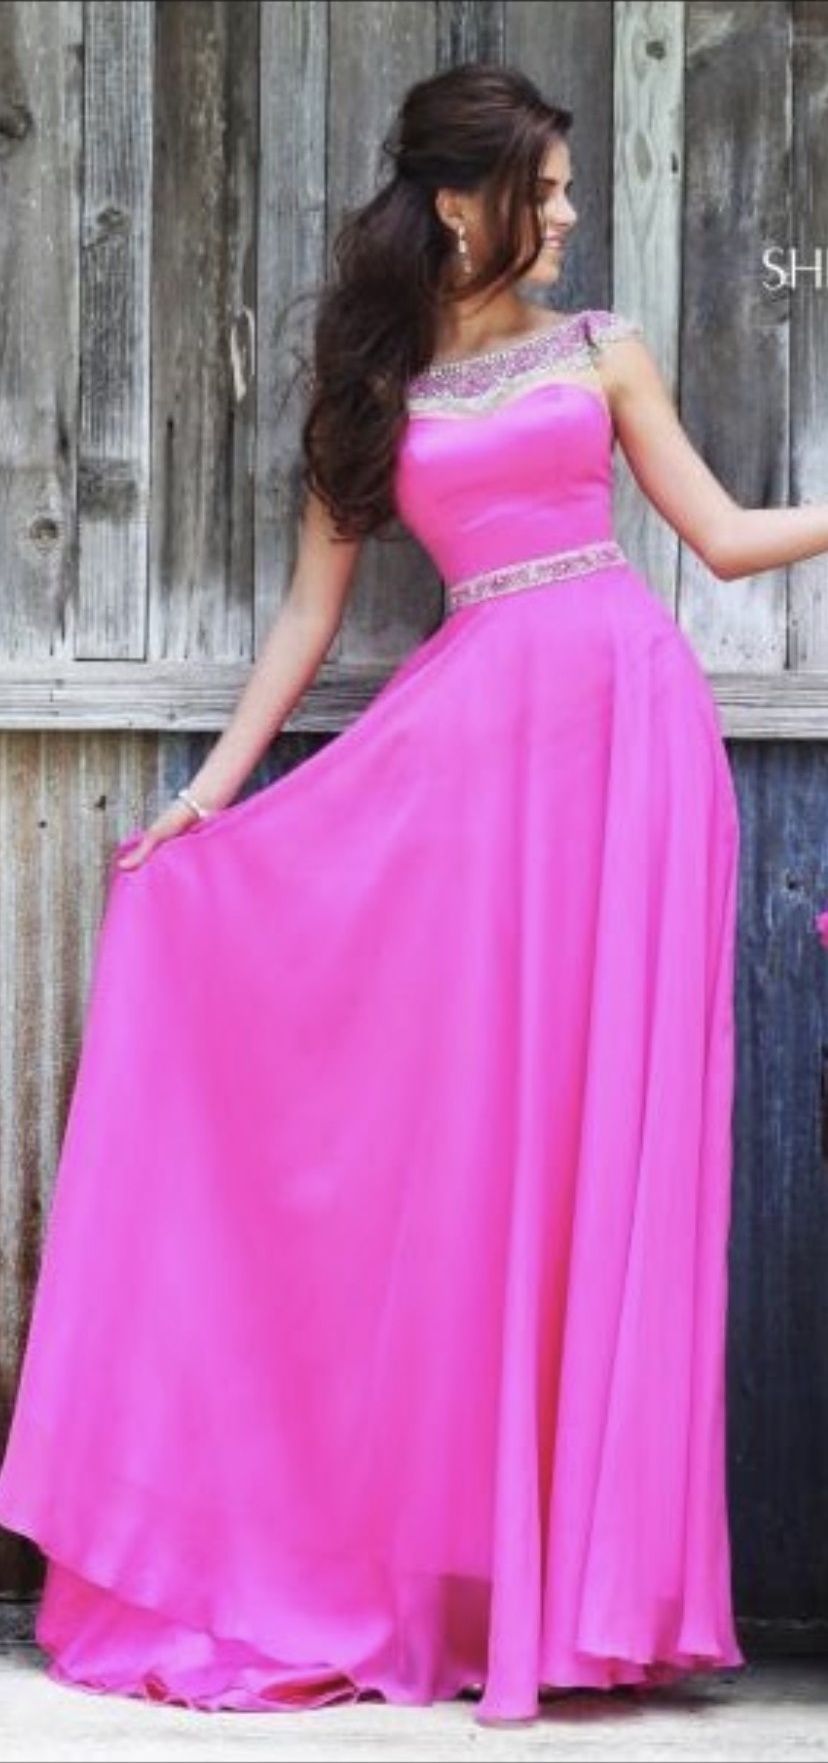 Sherri Hill Size 4 Prom Cap Sleeve Sequined Hot Pink A-line Dress on Queenly